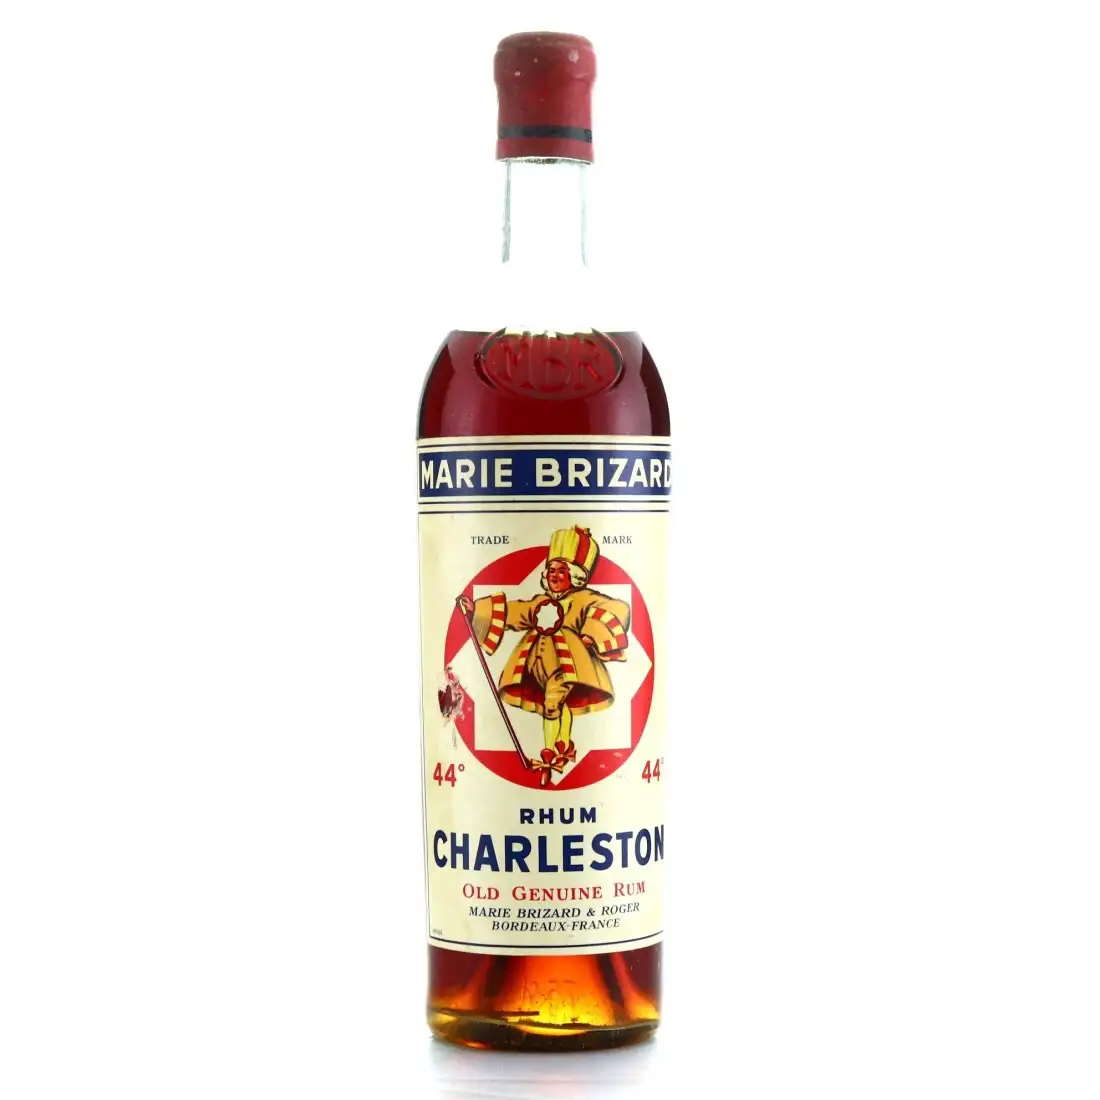 Image of the front of the bottle of the rum Marie Brizard Rhum Charleston